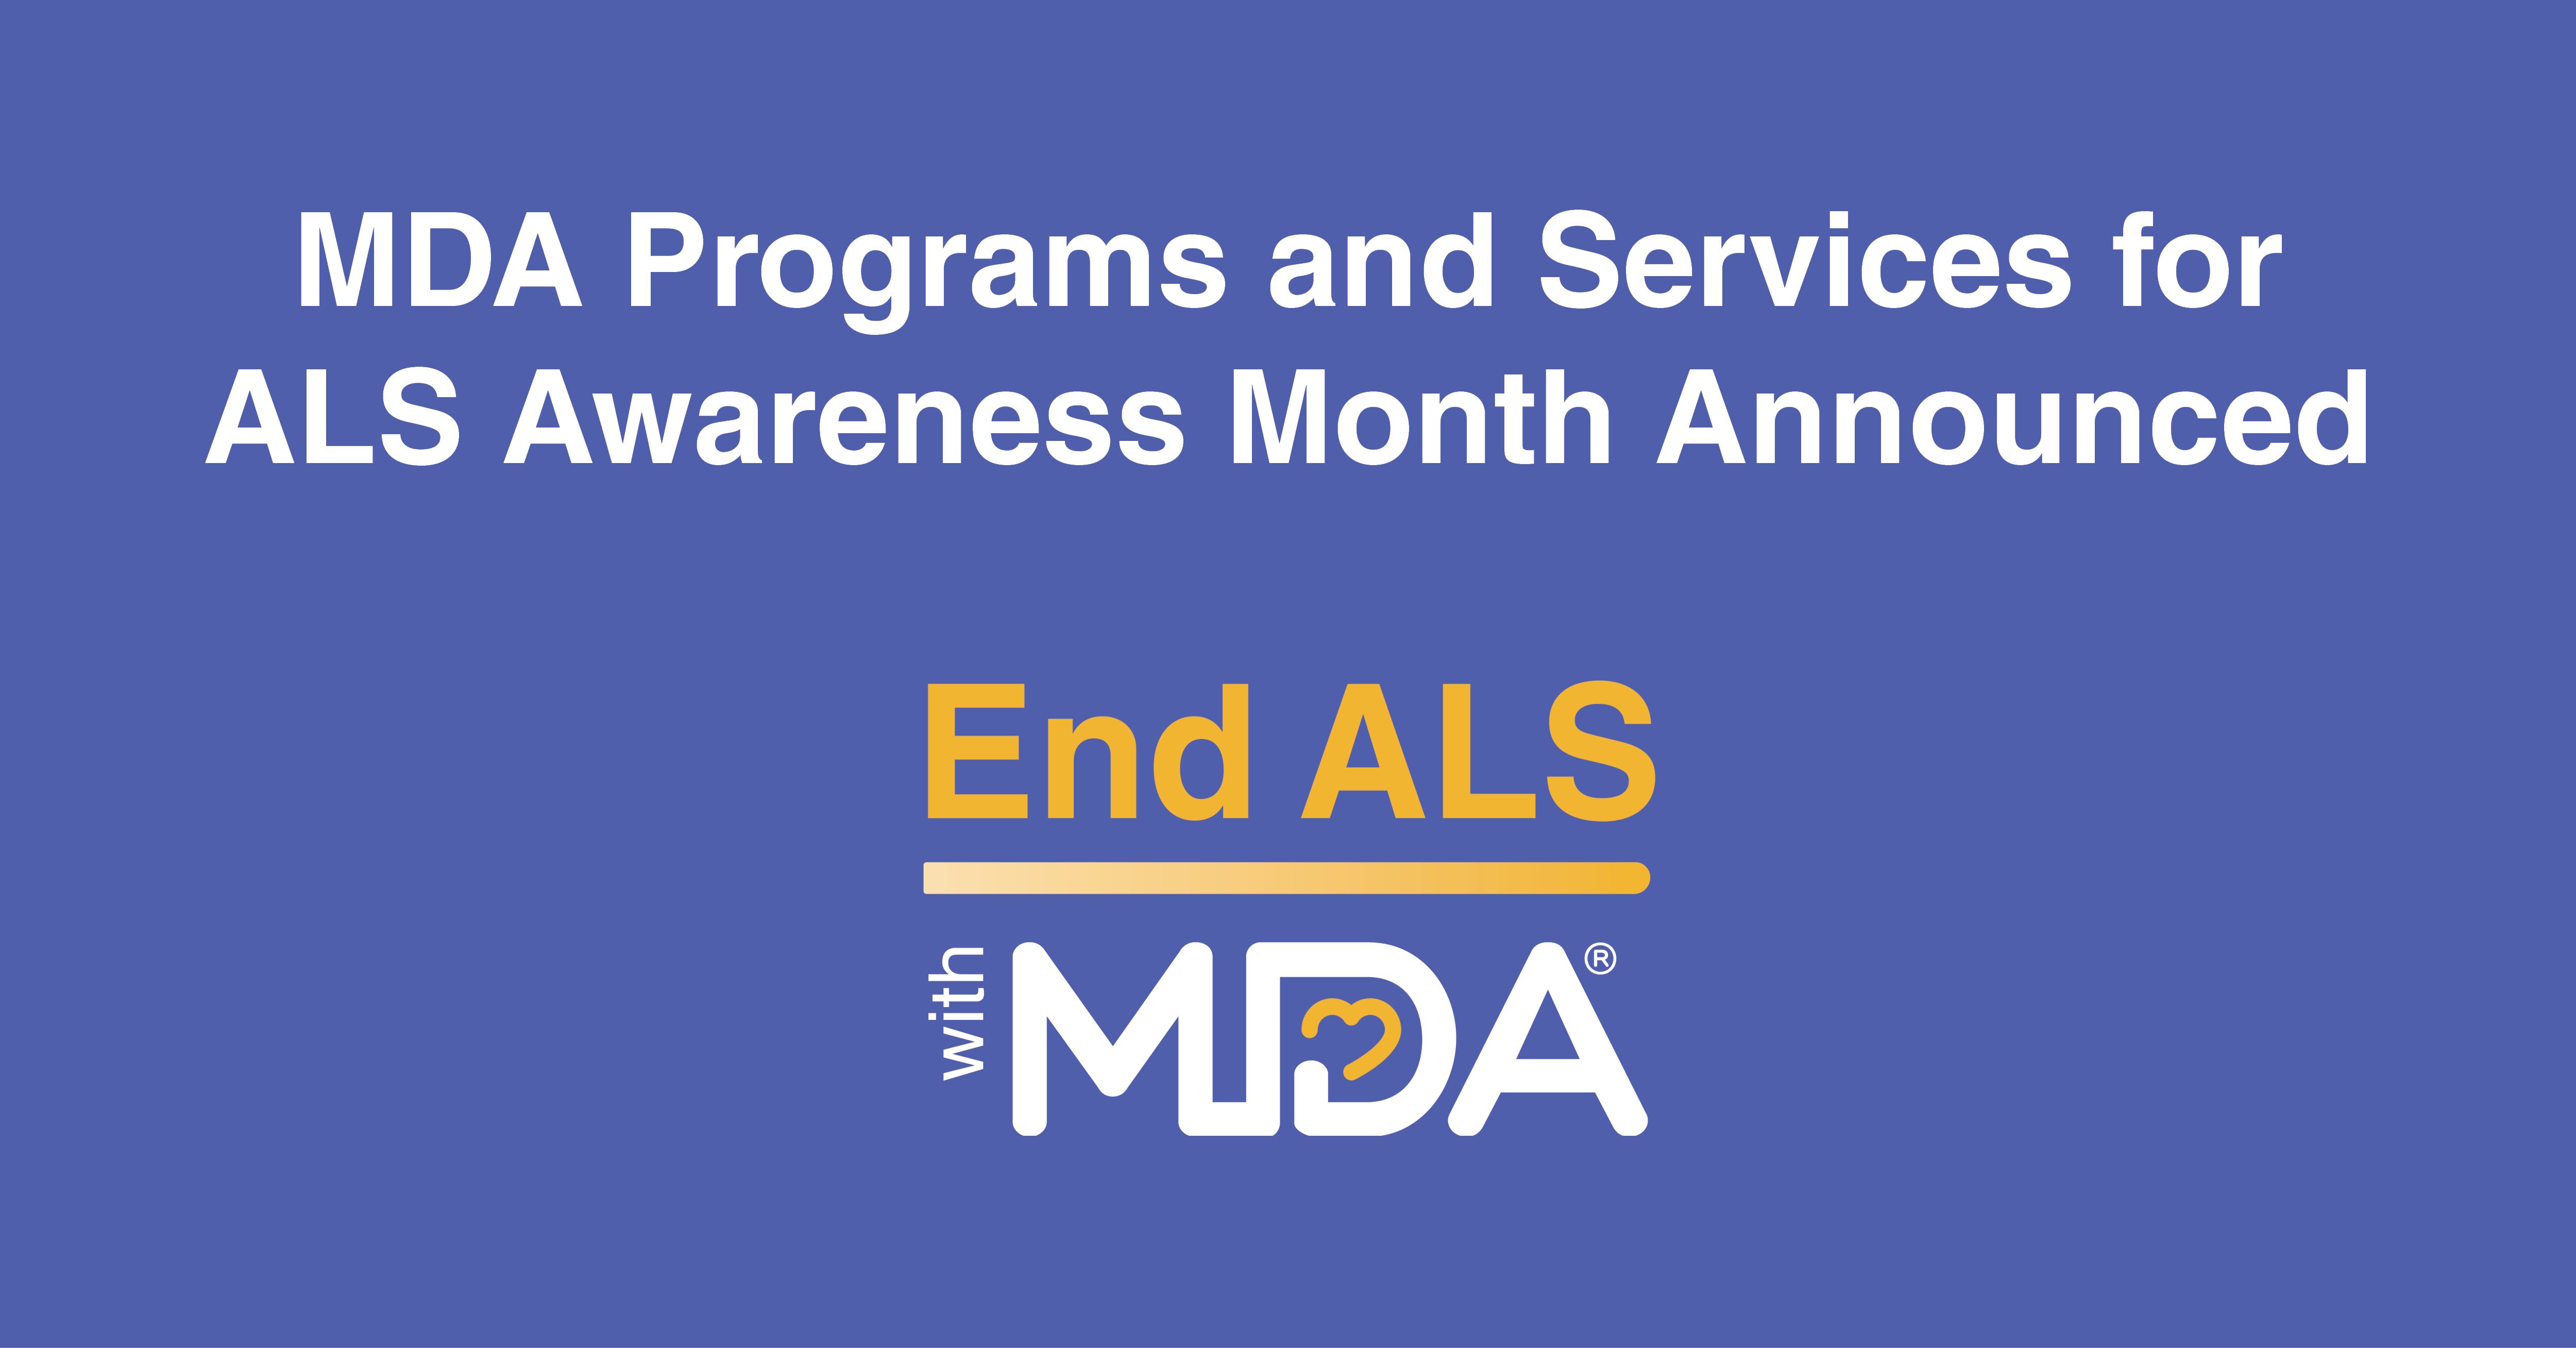 Muscular Dystrophy Association Announces Programming for ALS Awareness Month